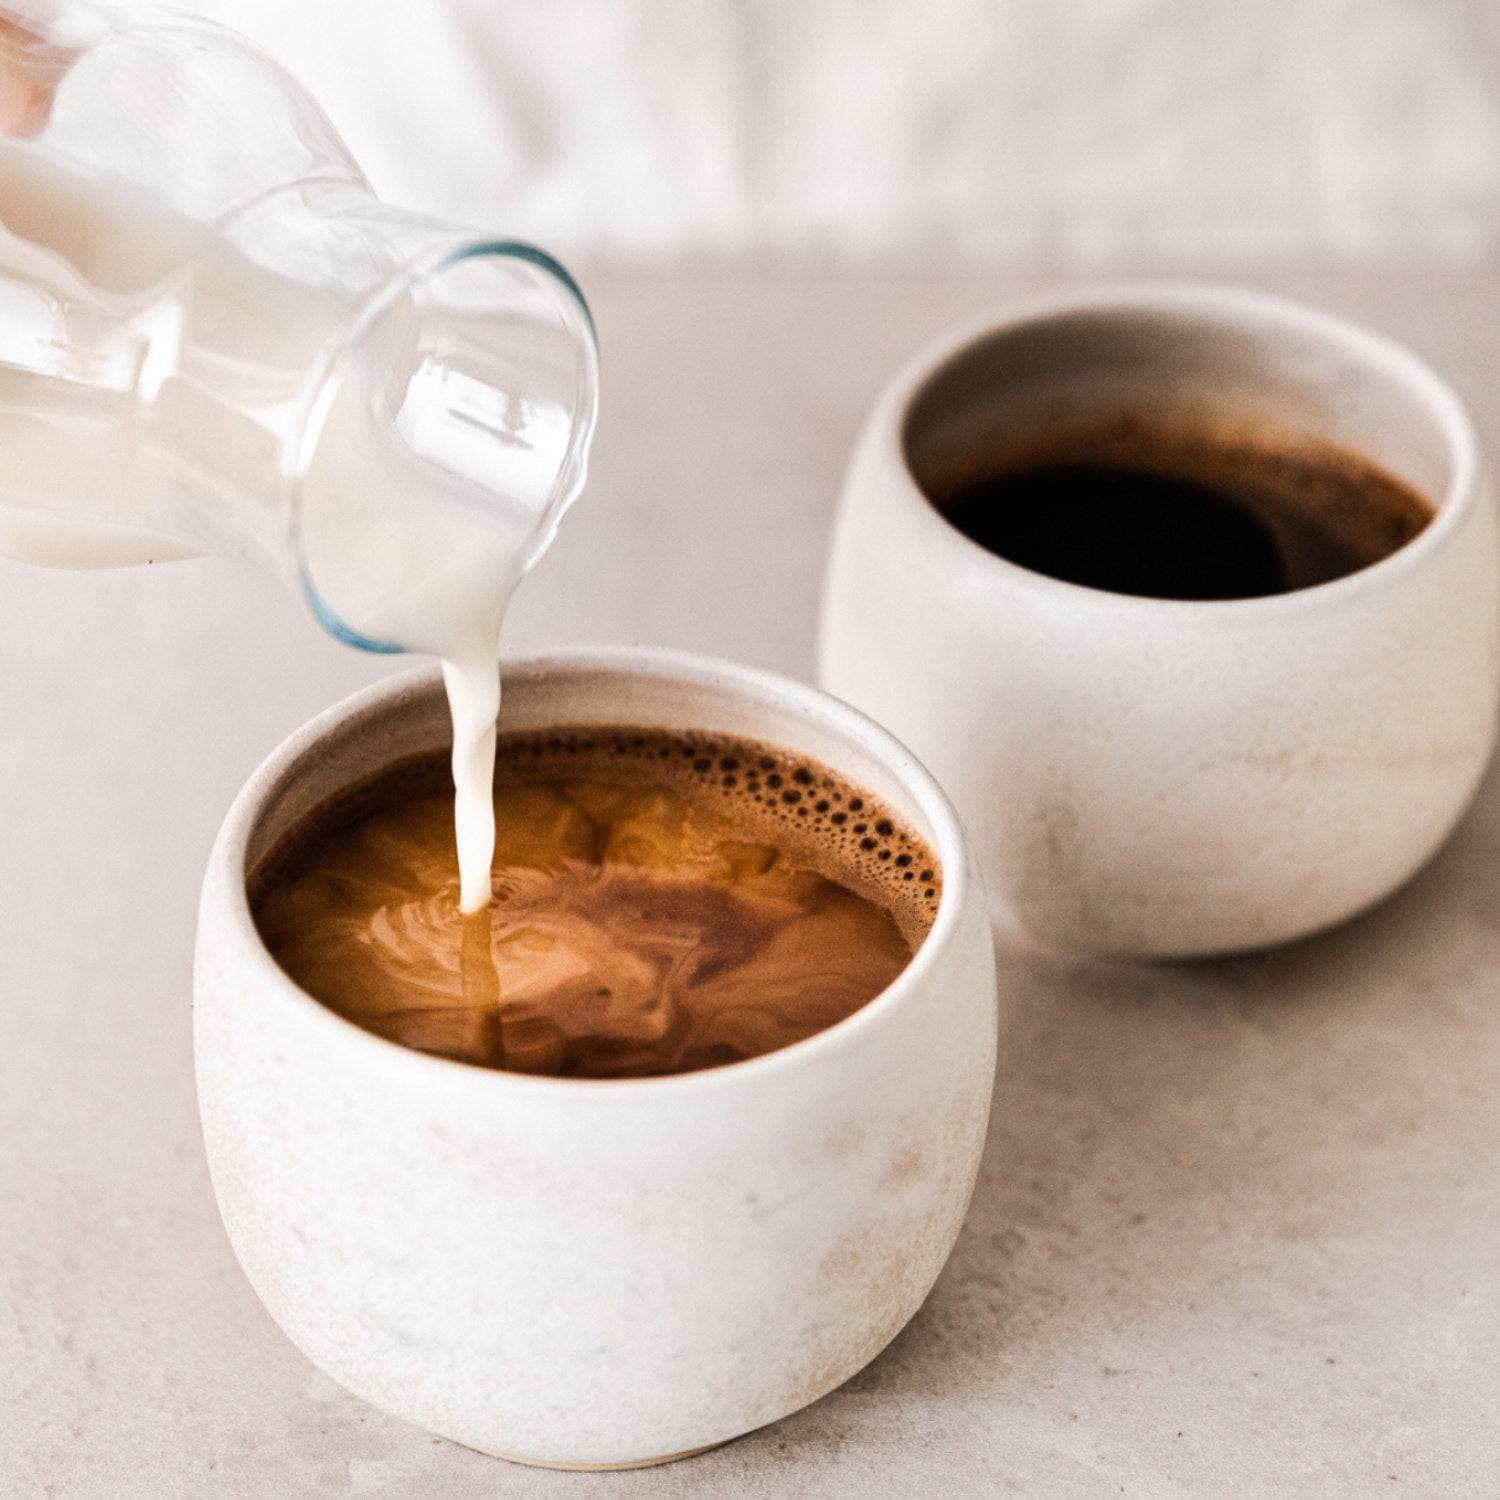 Can't Stand Black Coffee? Adding Milk May Decrease Inflammation